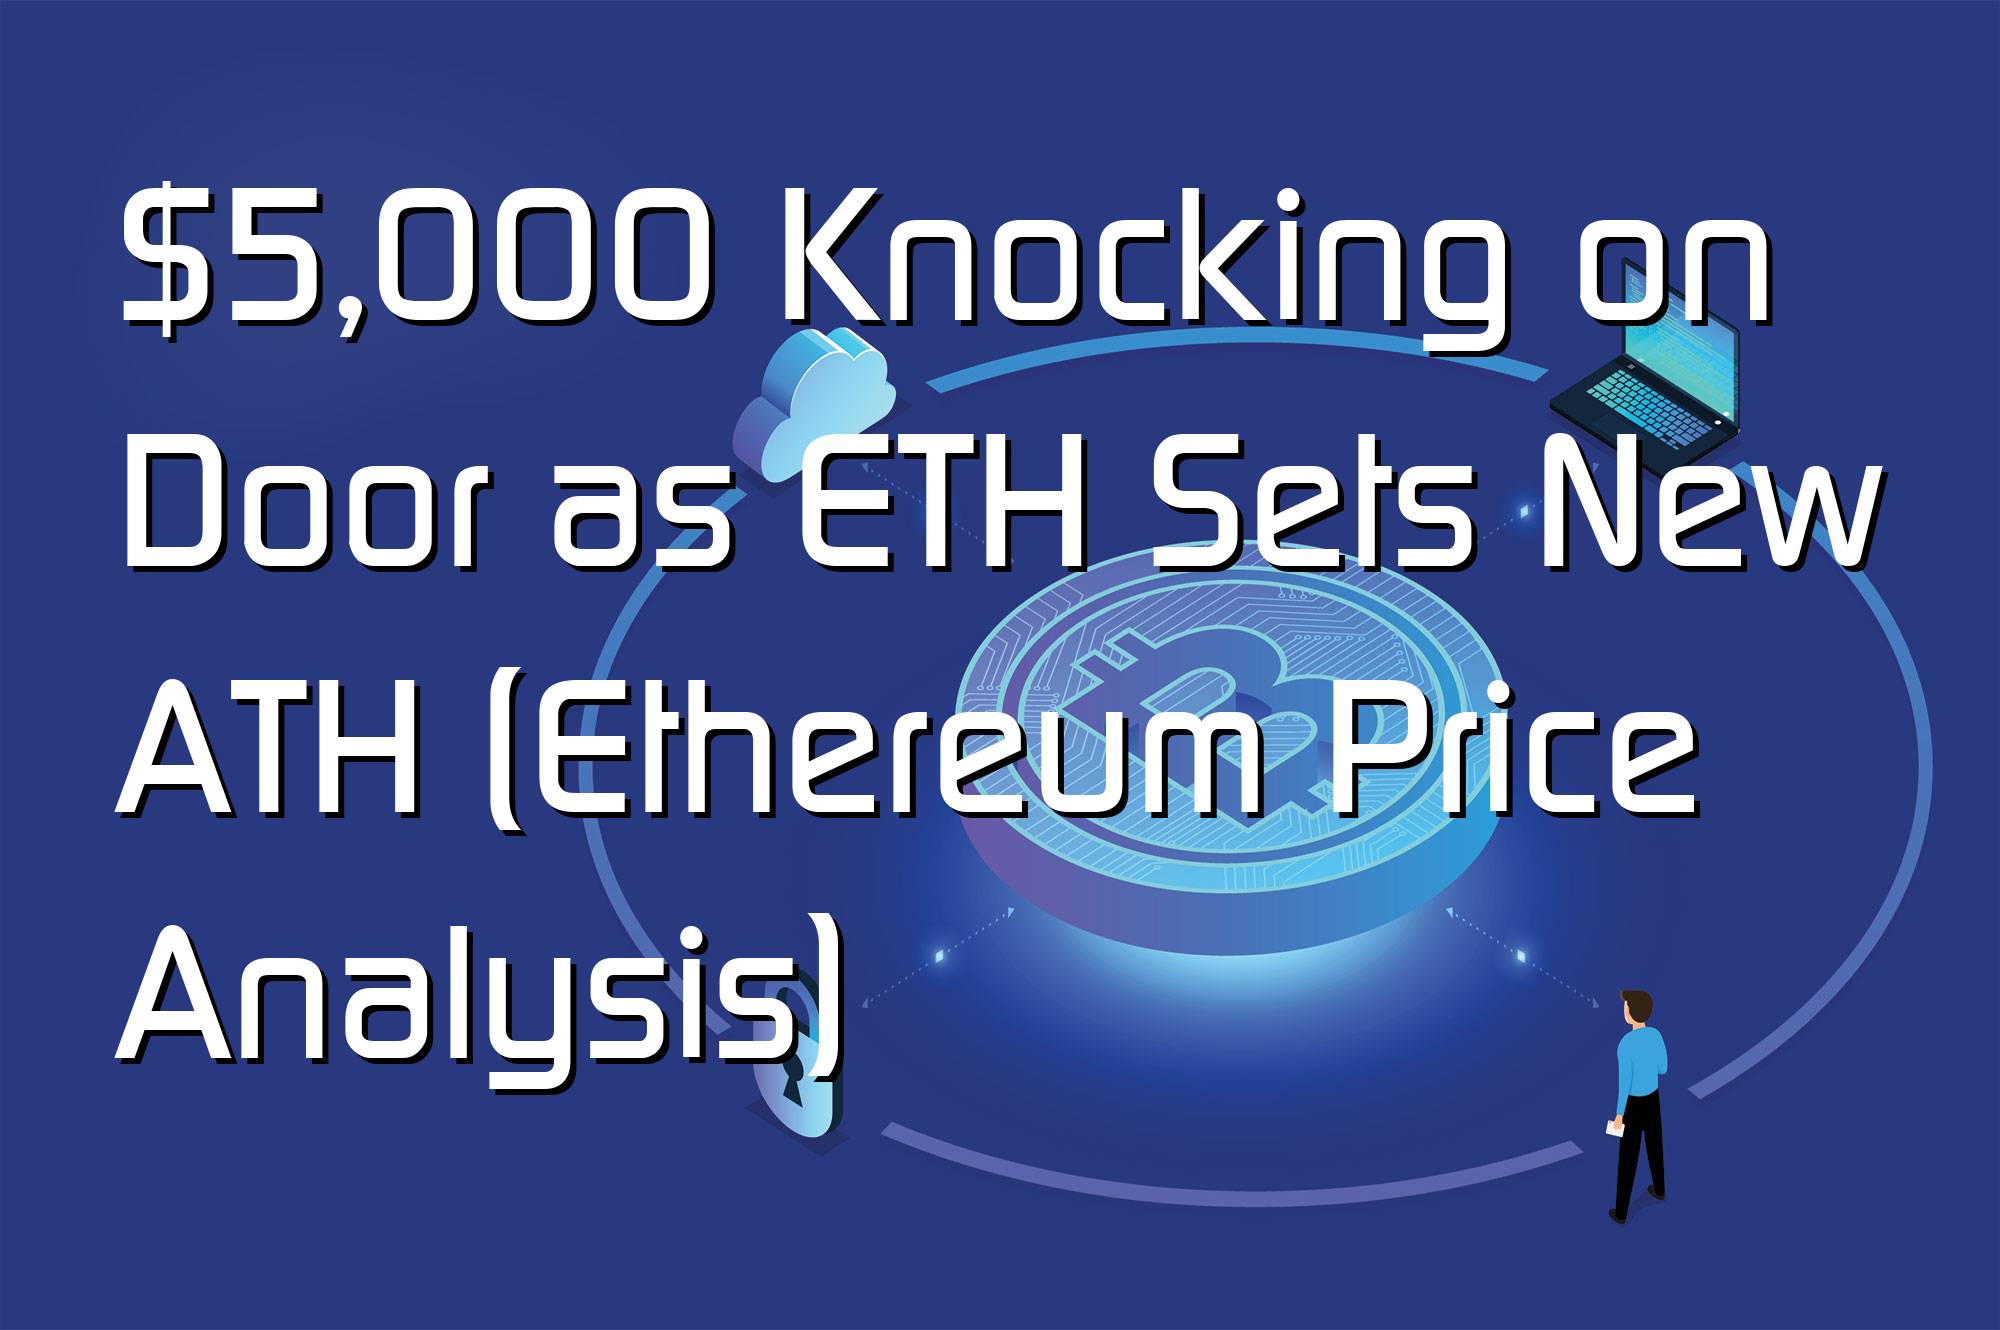 @$66143: $5,000 Knocking on Door as ETH Sets New ATH (Ethereum Price Analysis)